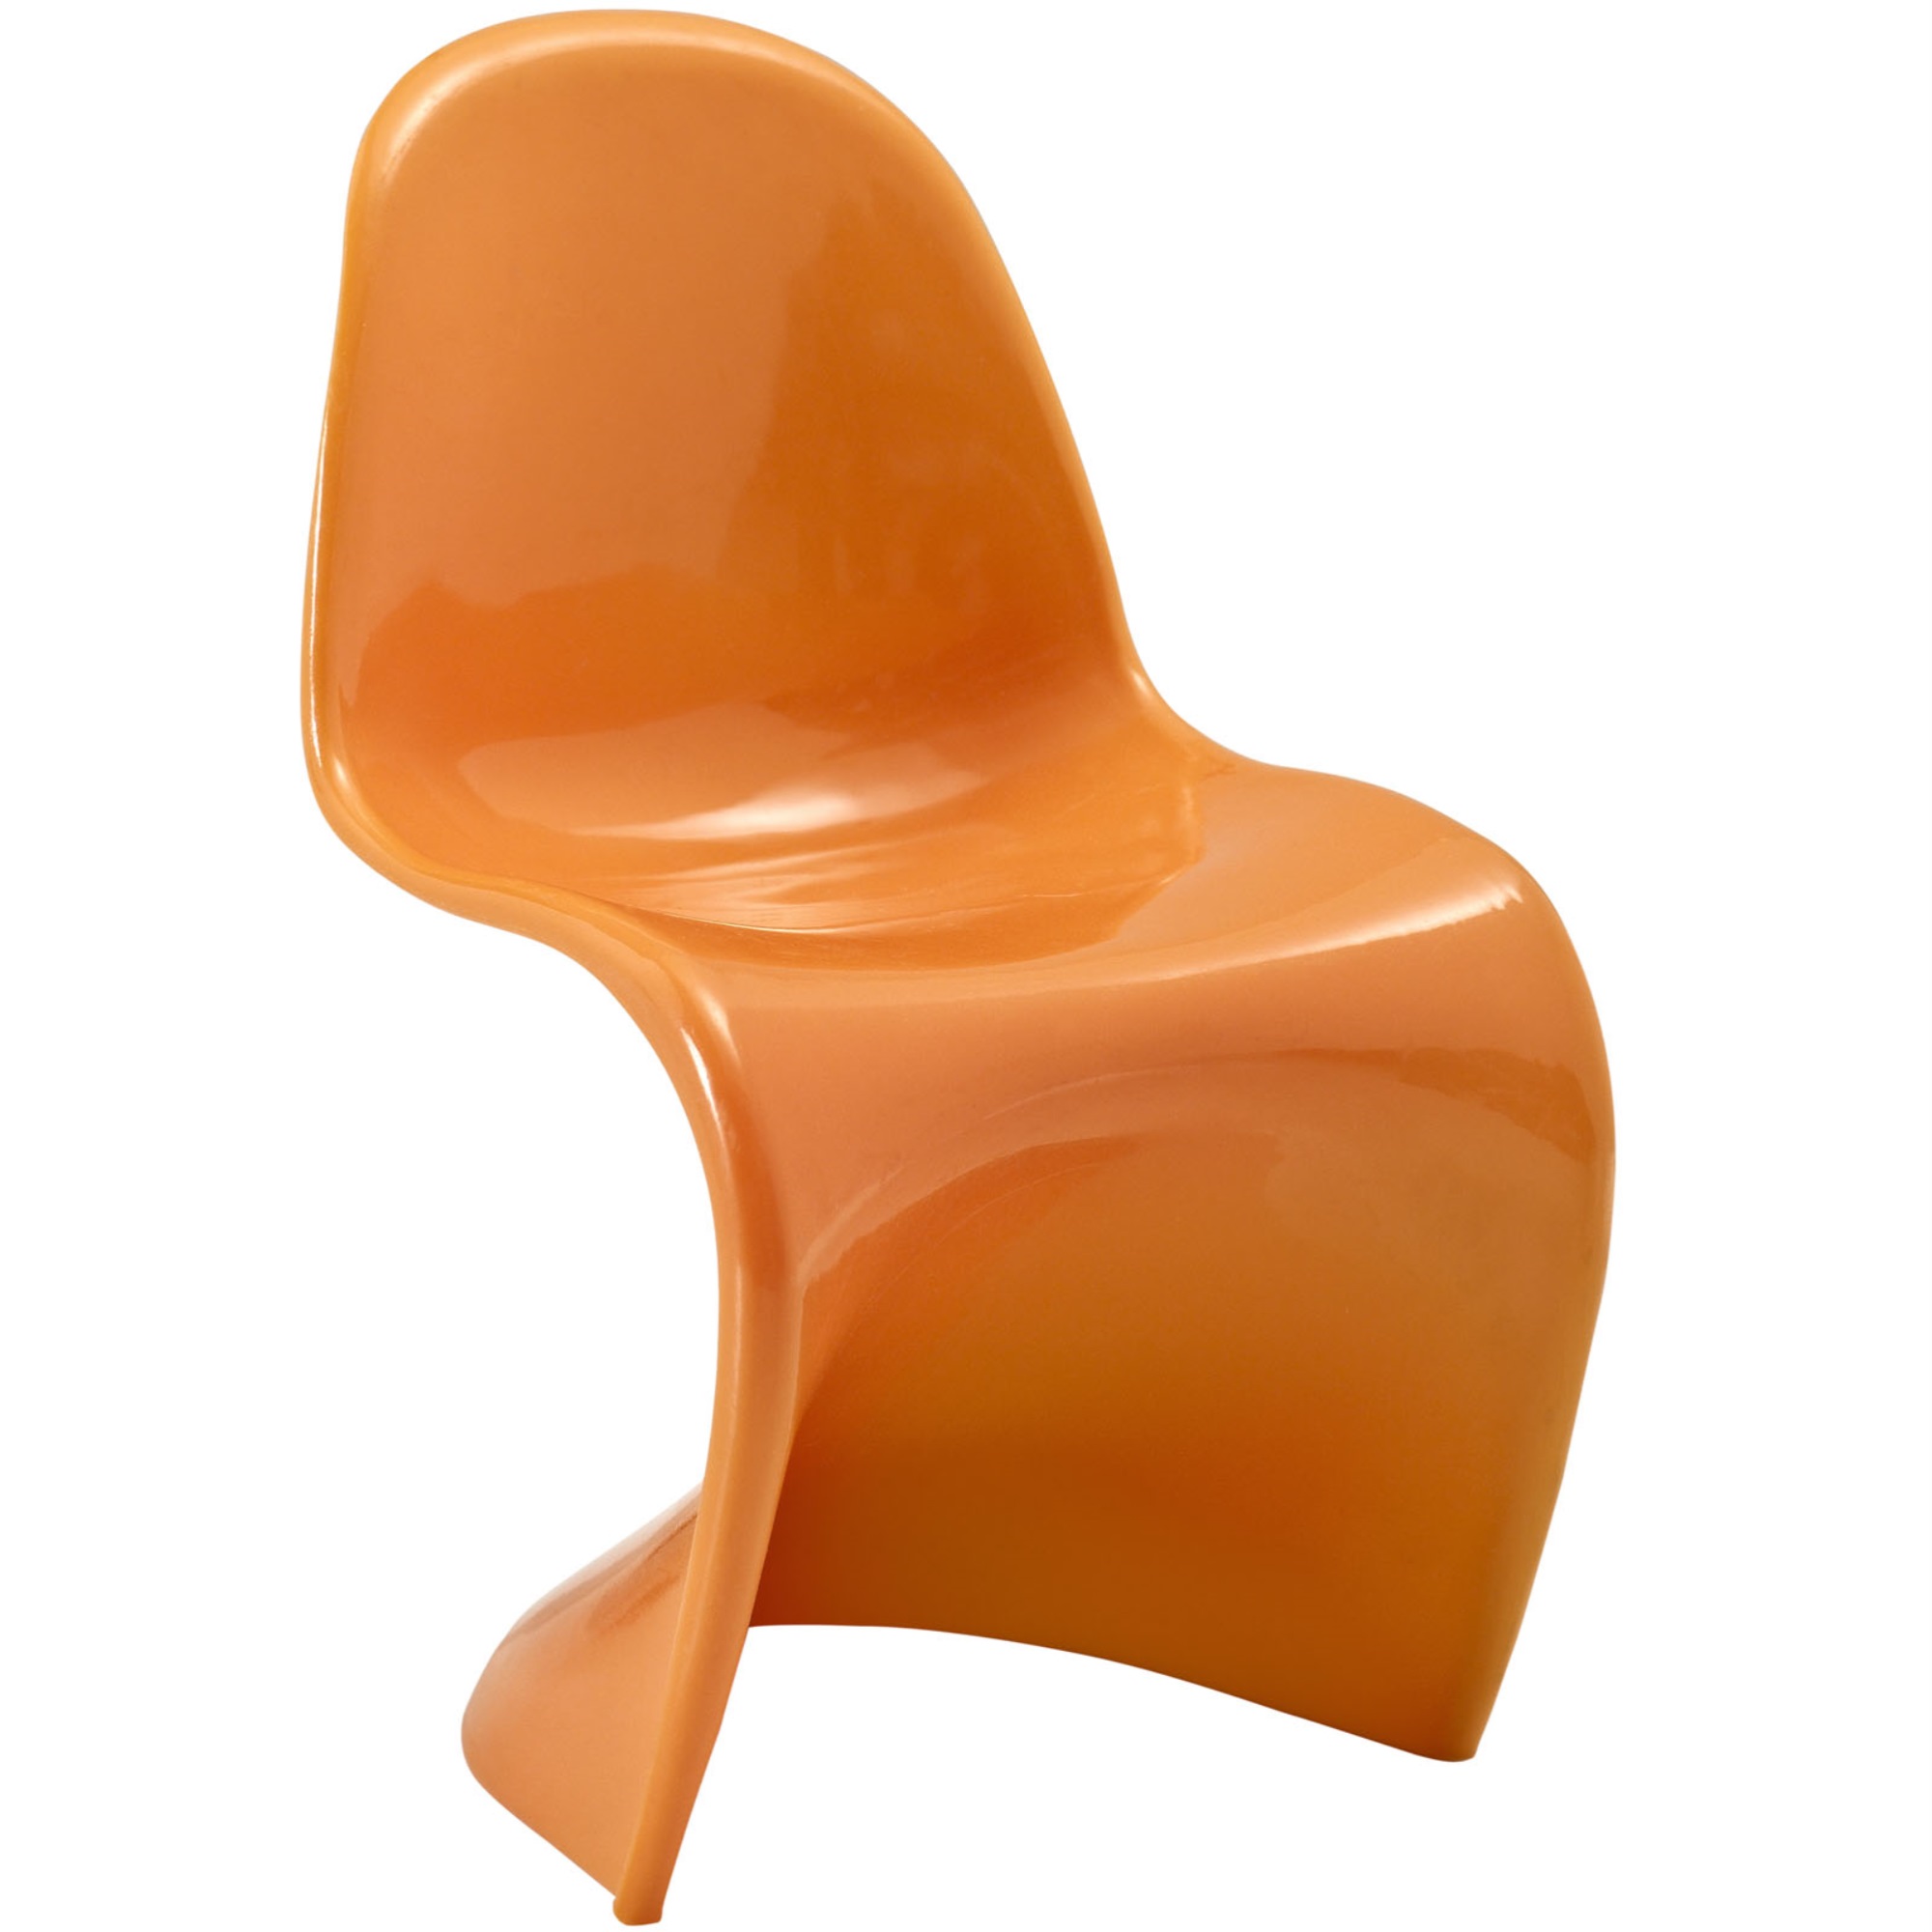 Novelty Chair in Orange - image 1 of 3